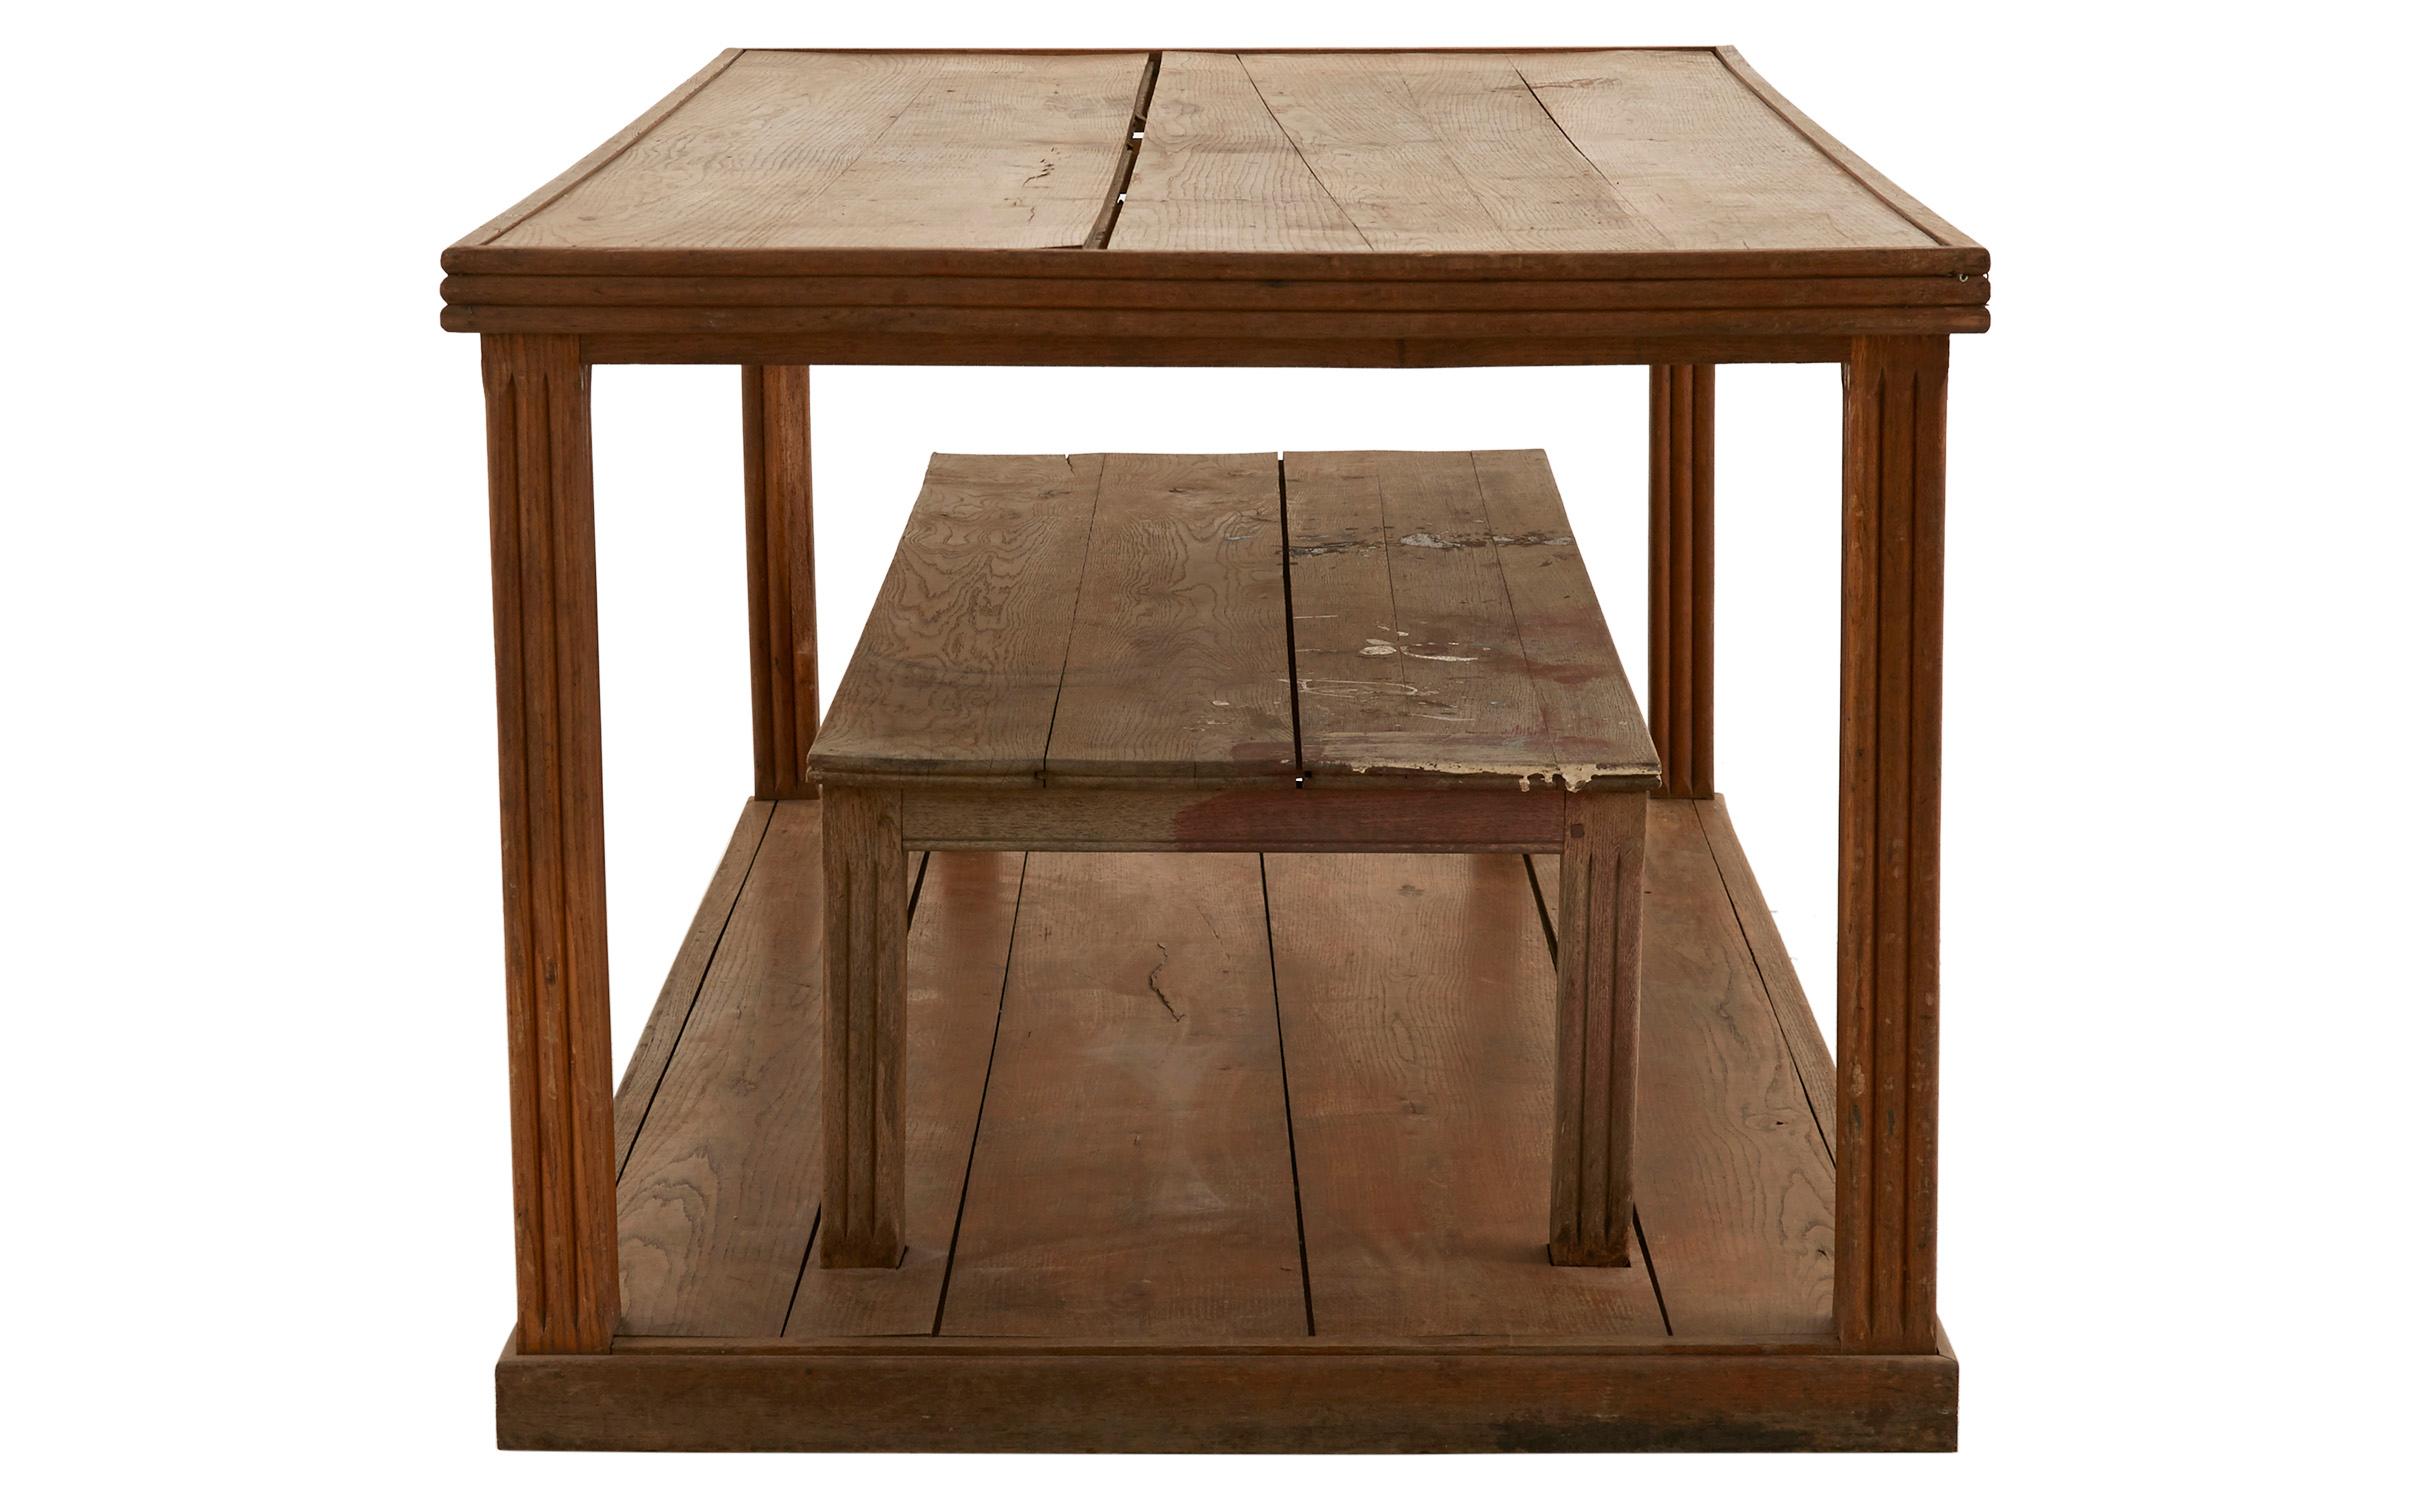 Early 20th Century Wooden Dressmaker's Table (Industriell)